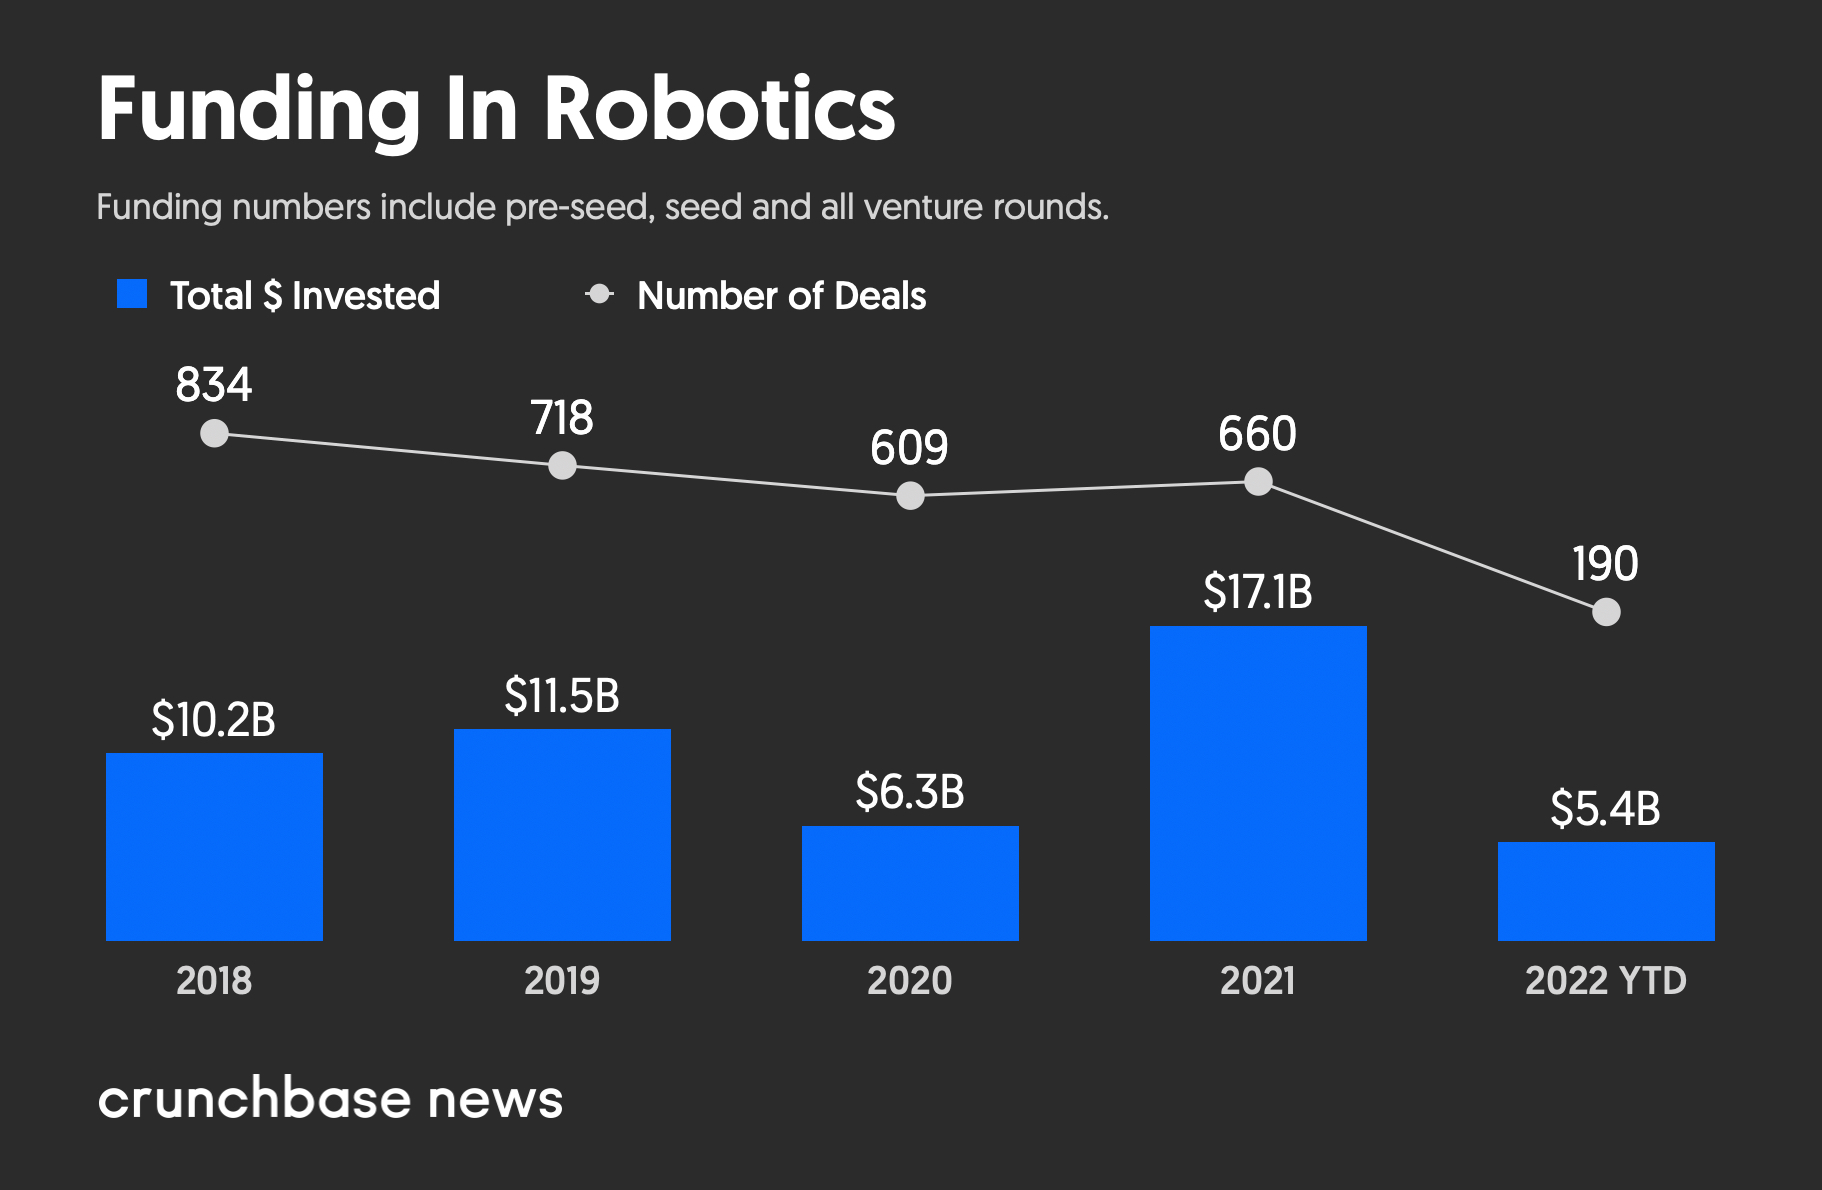 Raise capital in robotics and automation